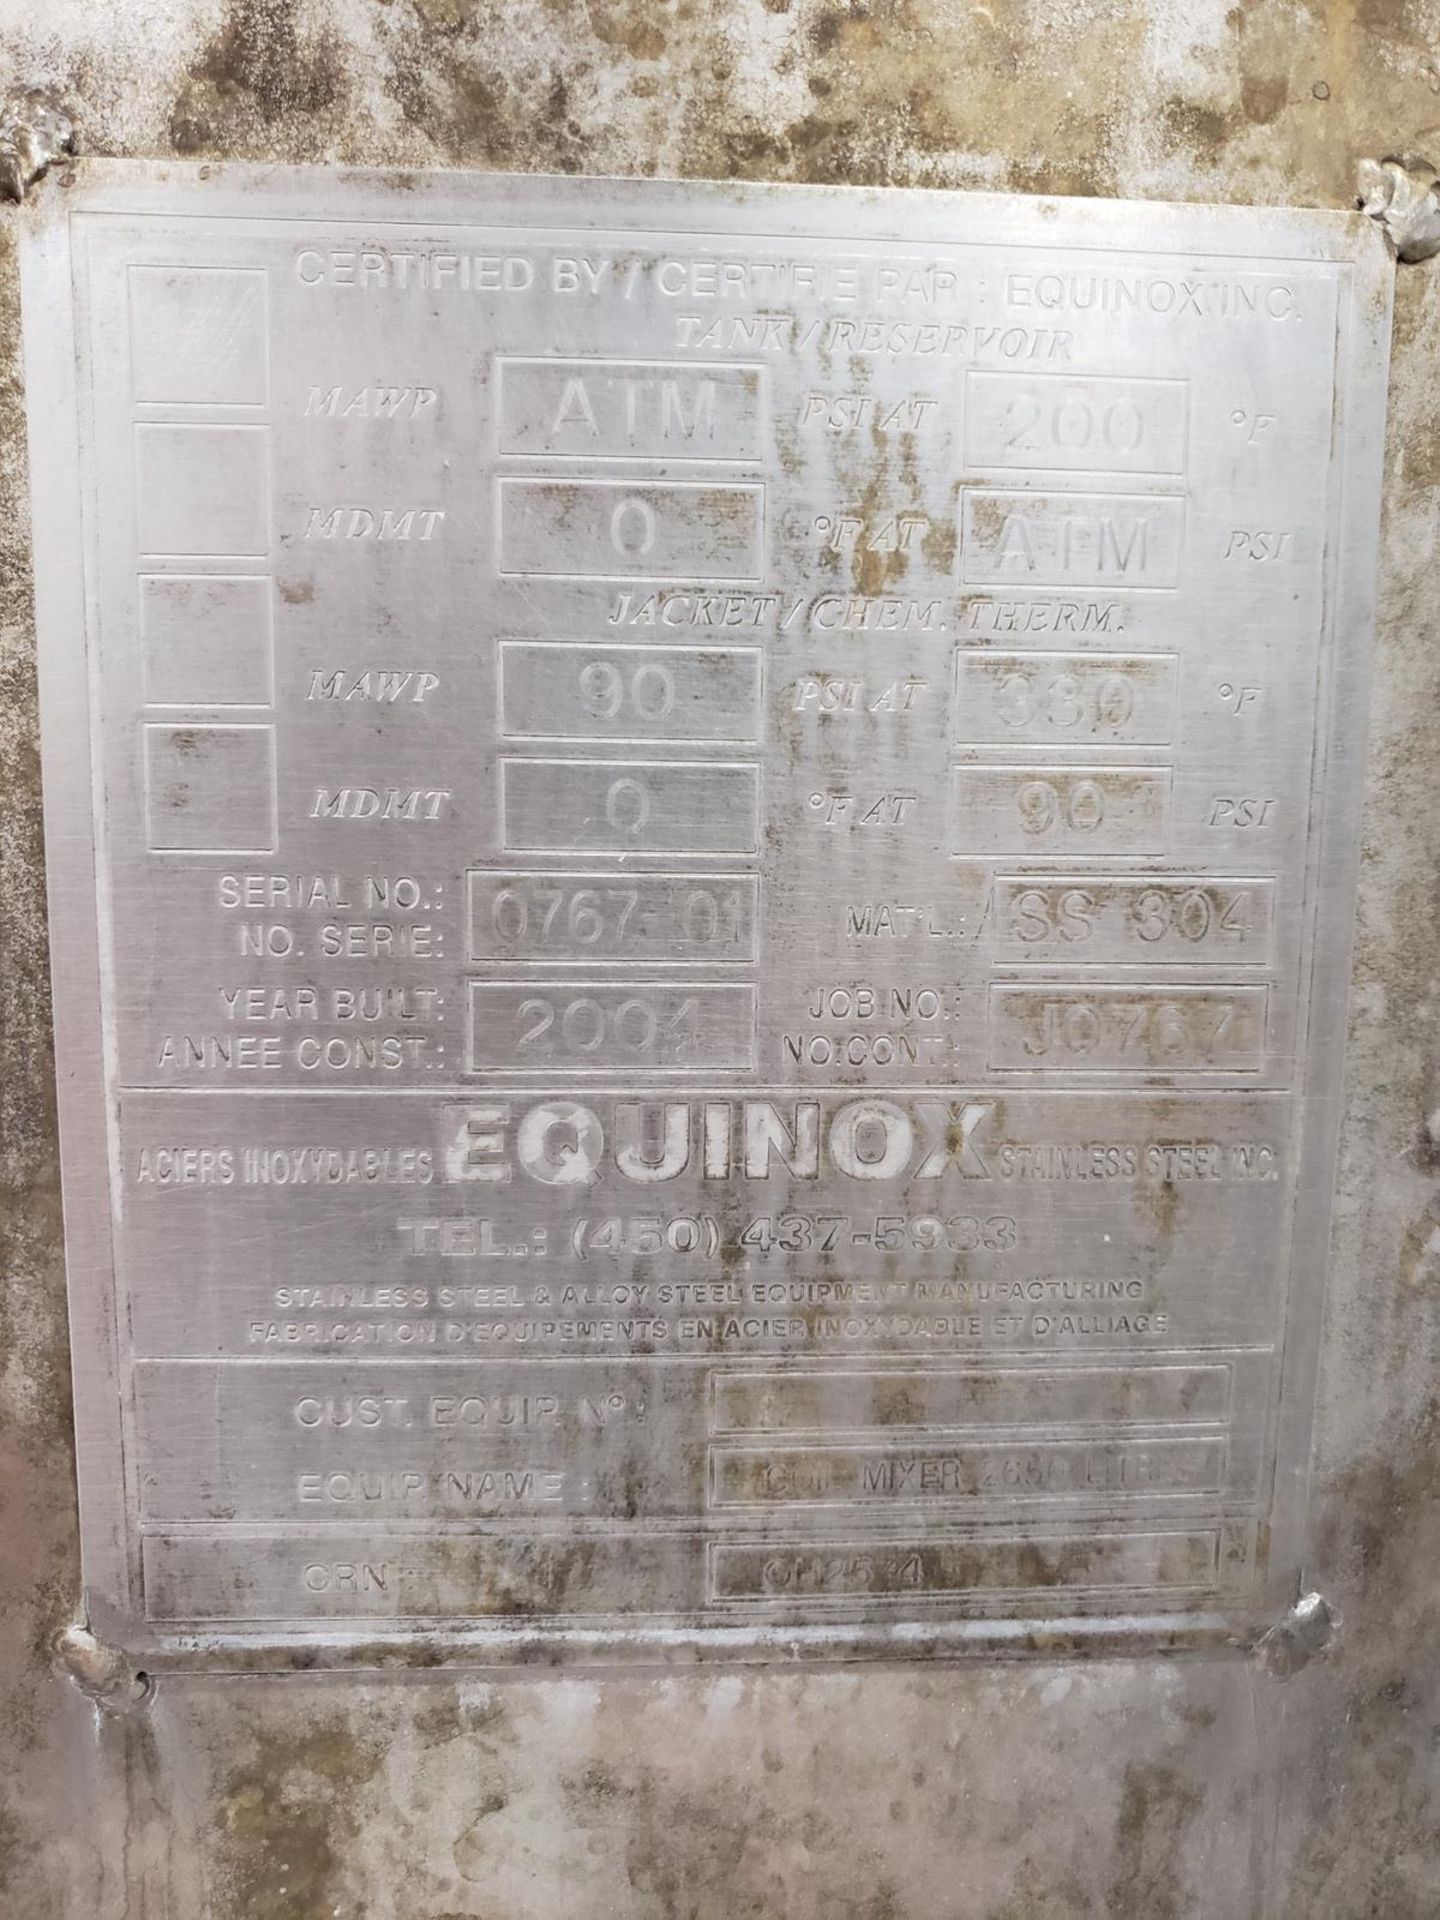 Equinox 2,700 Liter Continuous Rotary Cooker, M# J0767, S/N 0767-01, W/ Load Chute & | Rig Fee $1500 - Image 2 of 9